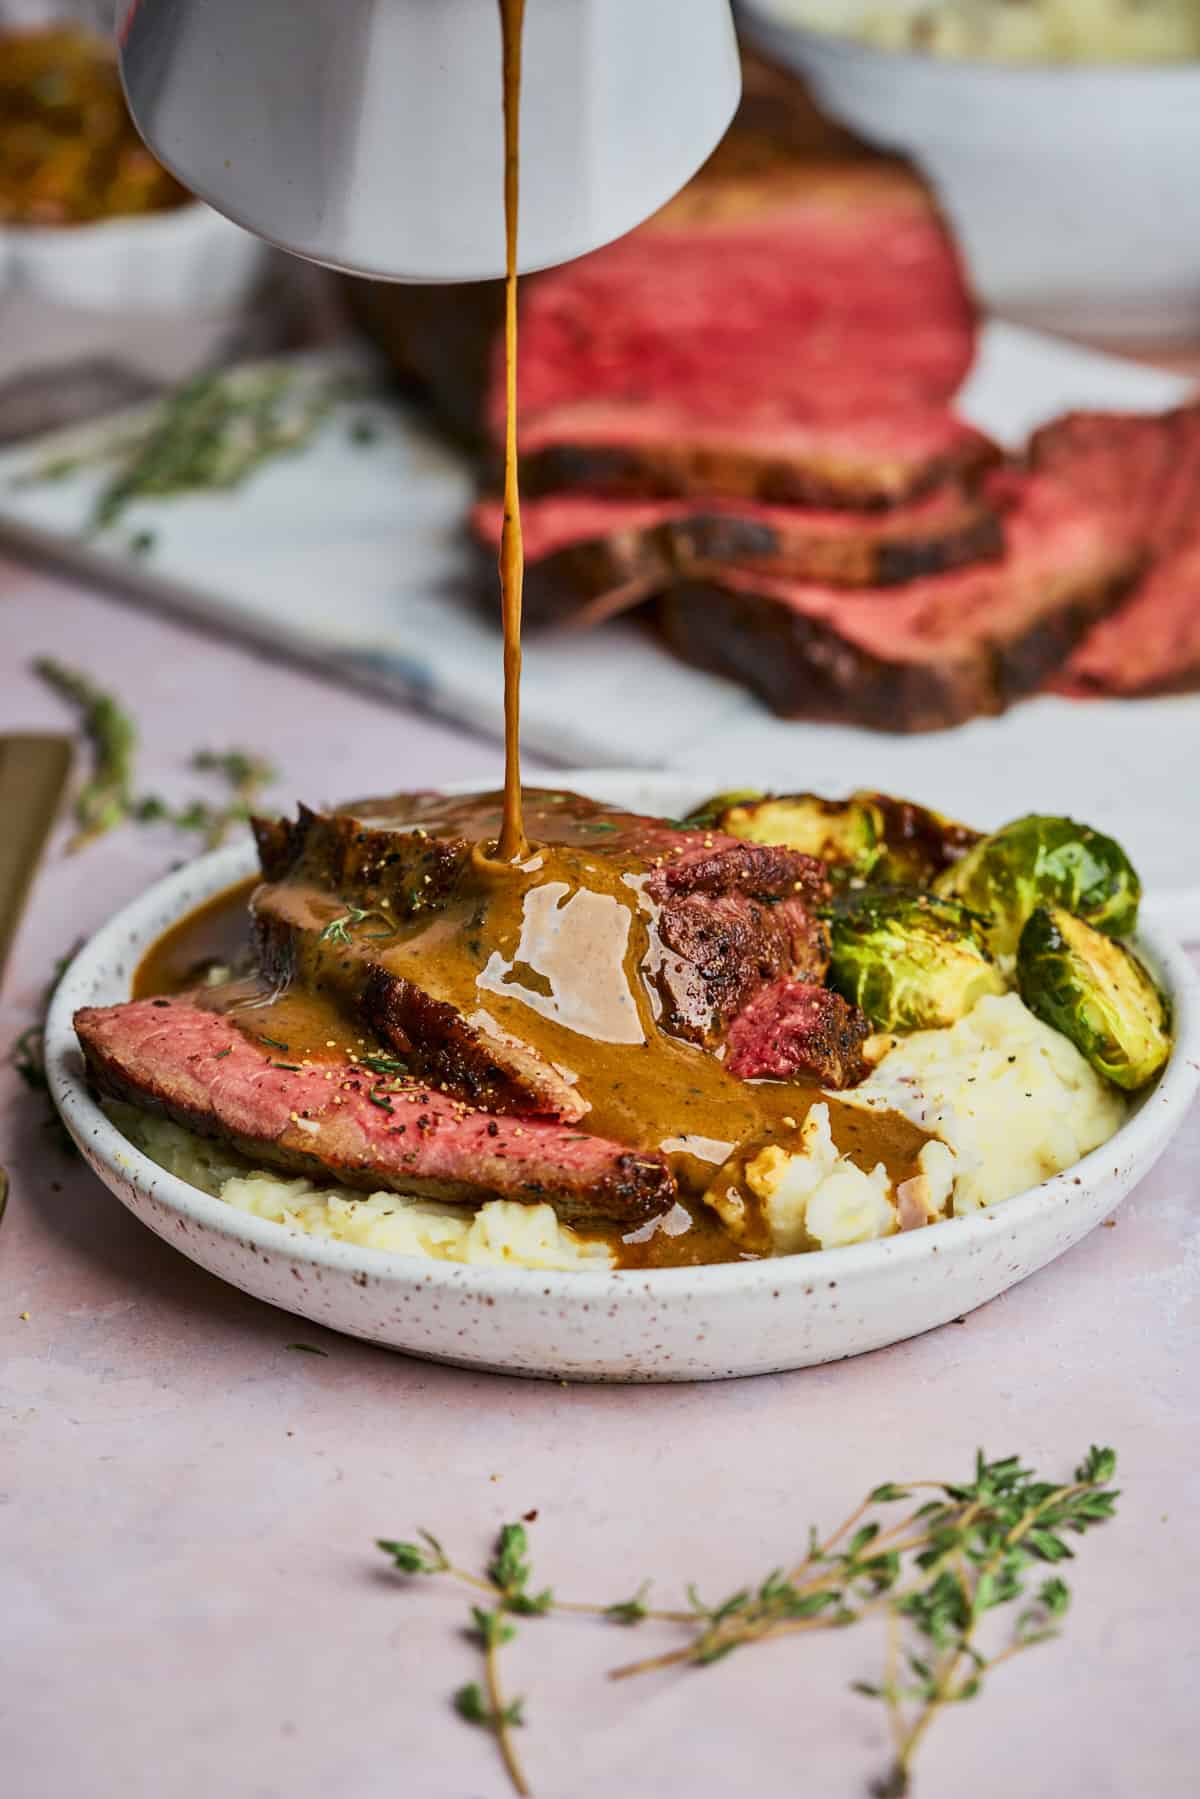 drizzling brown gravy overtop of roast beef on a plate with mashed potatoes and brussel sprouts, with the carved roast beef in the back.